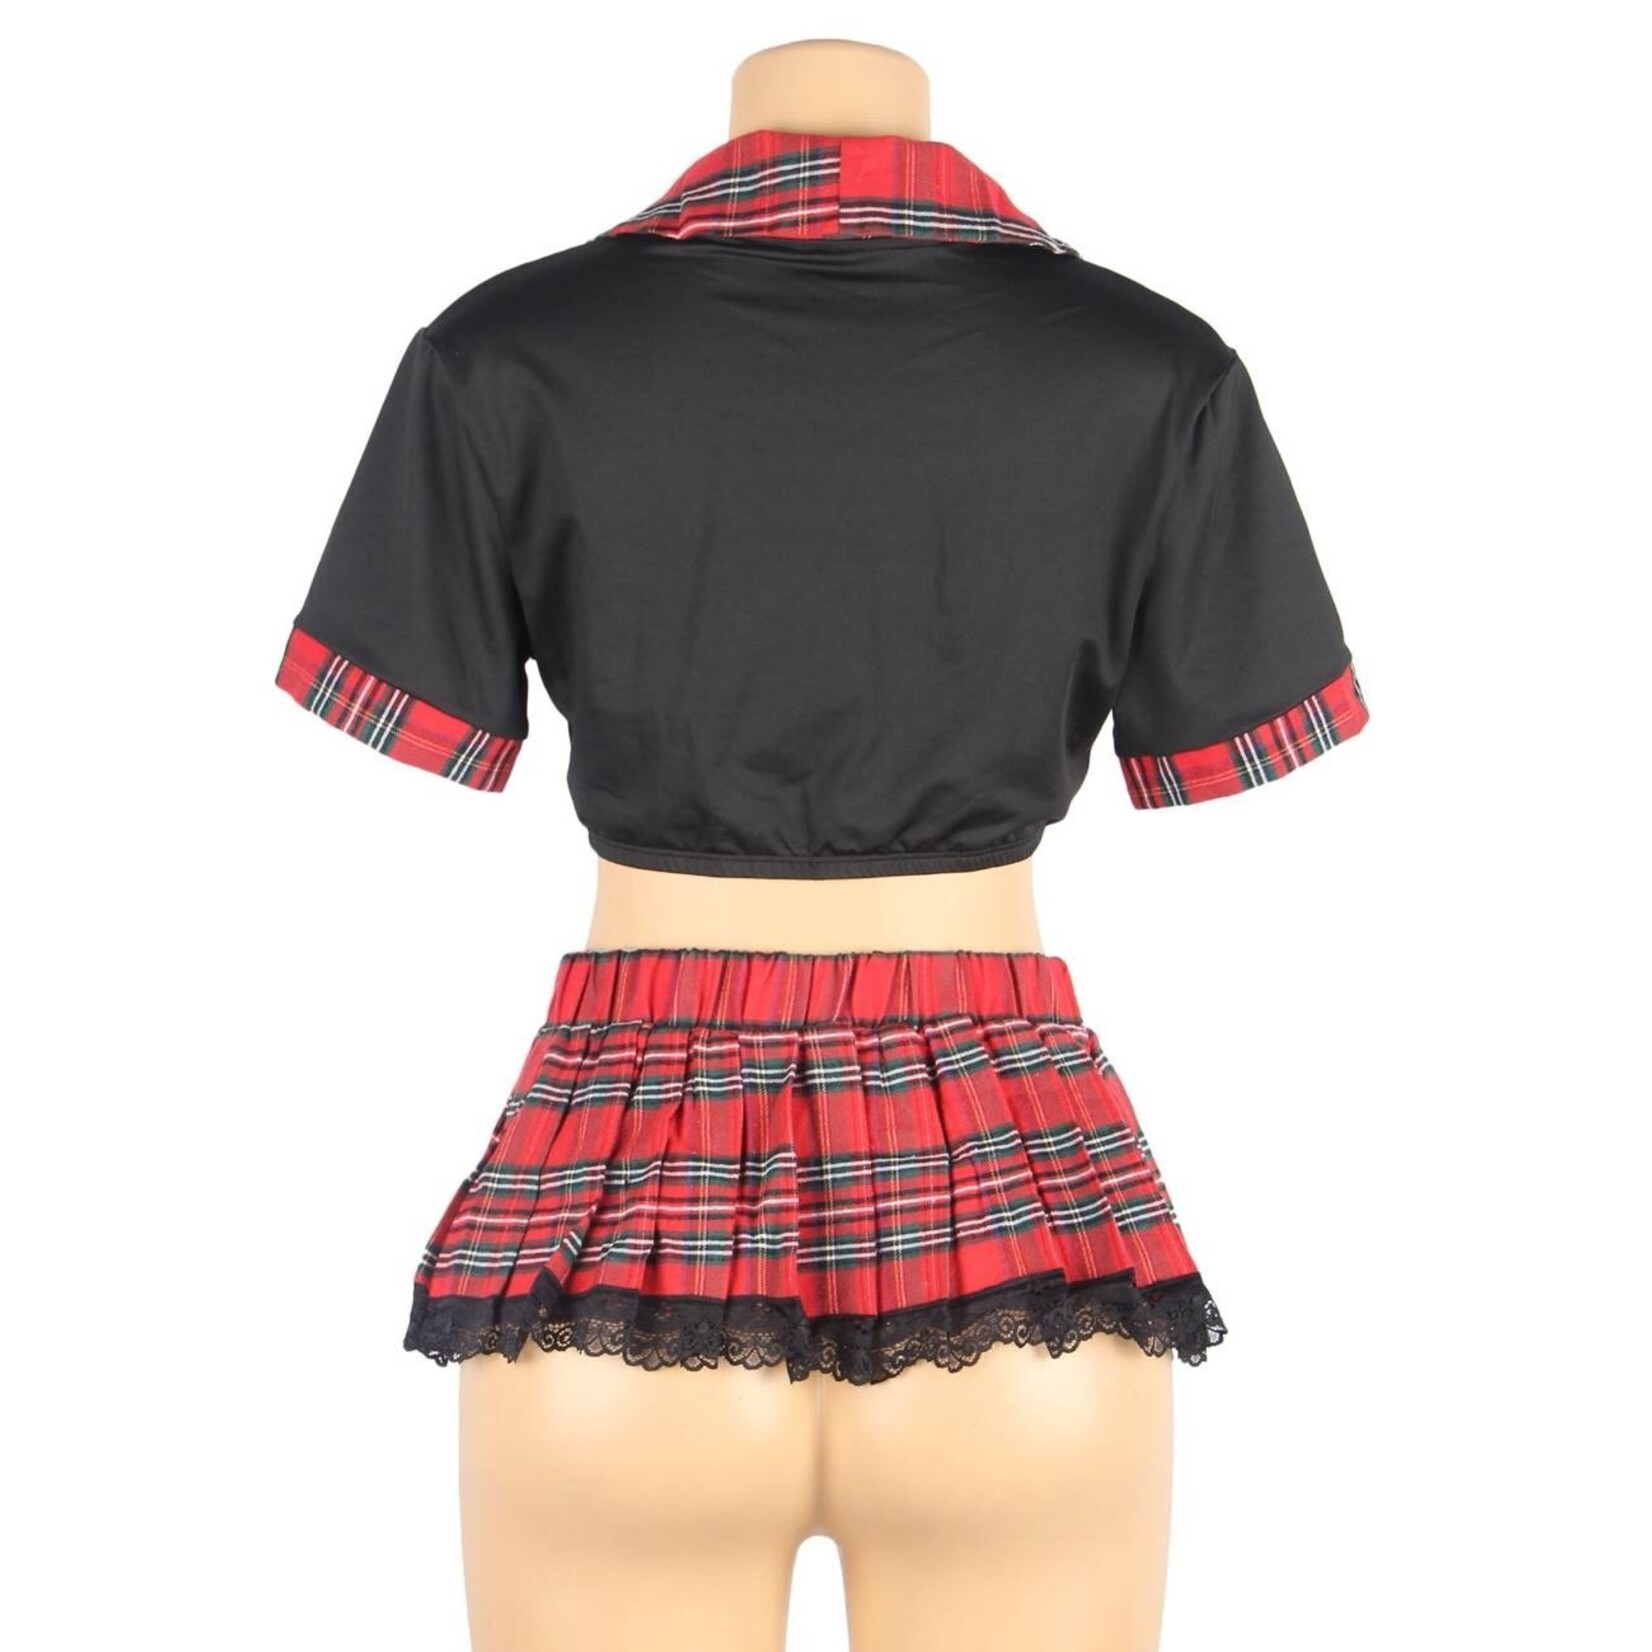 OH YEAH! -  SEXY UNIFORM HIGH-QUALITY STUDENT PLEATED SKIRT COLLEGE STYLE COSPLAY SUIT M-L